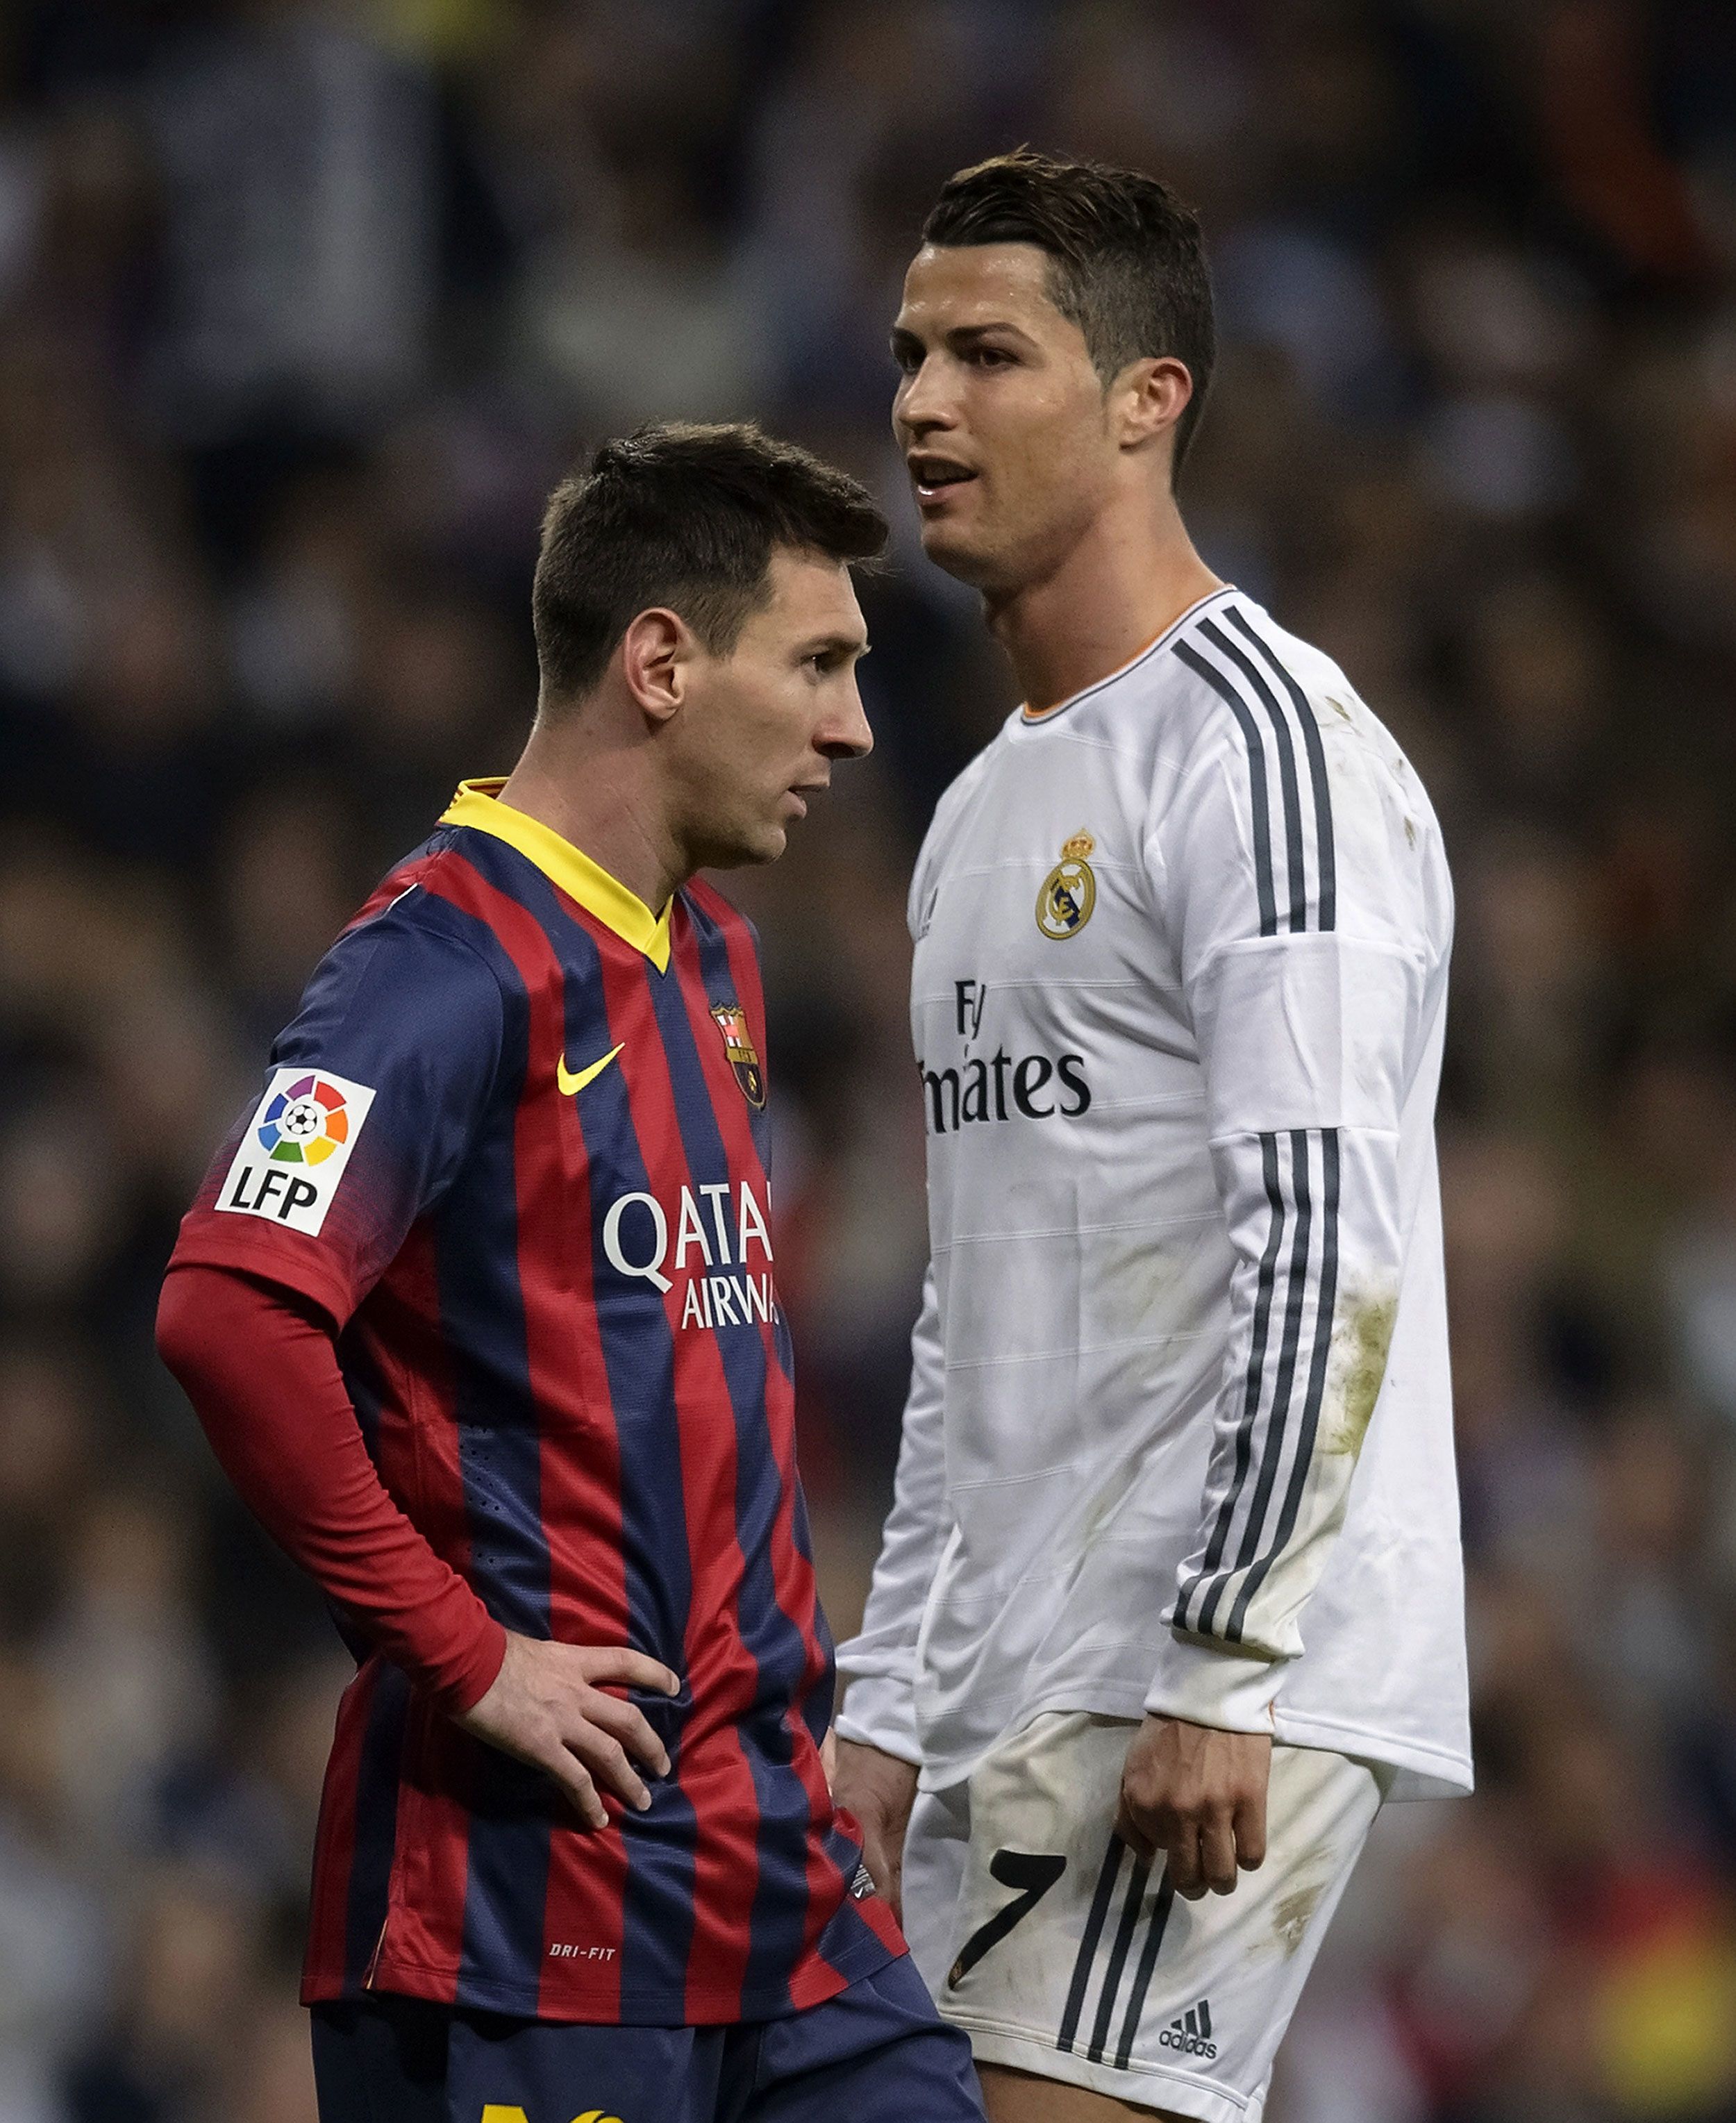 See Ronaldo and Messi doing Photoshoot together